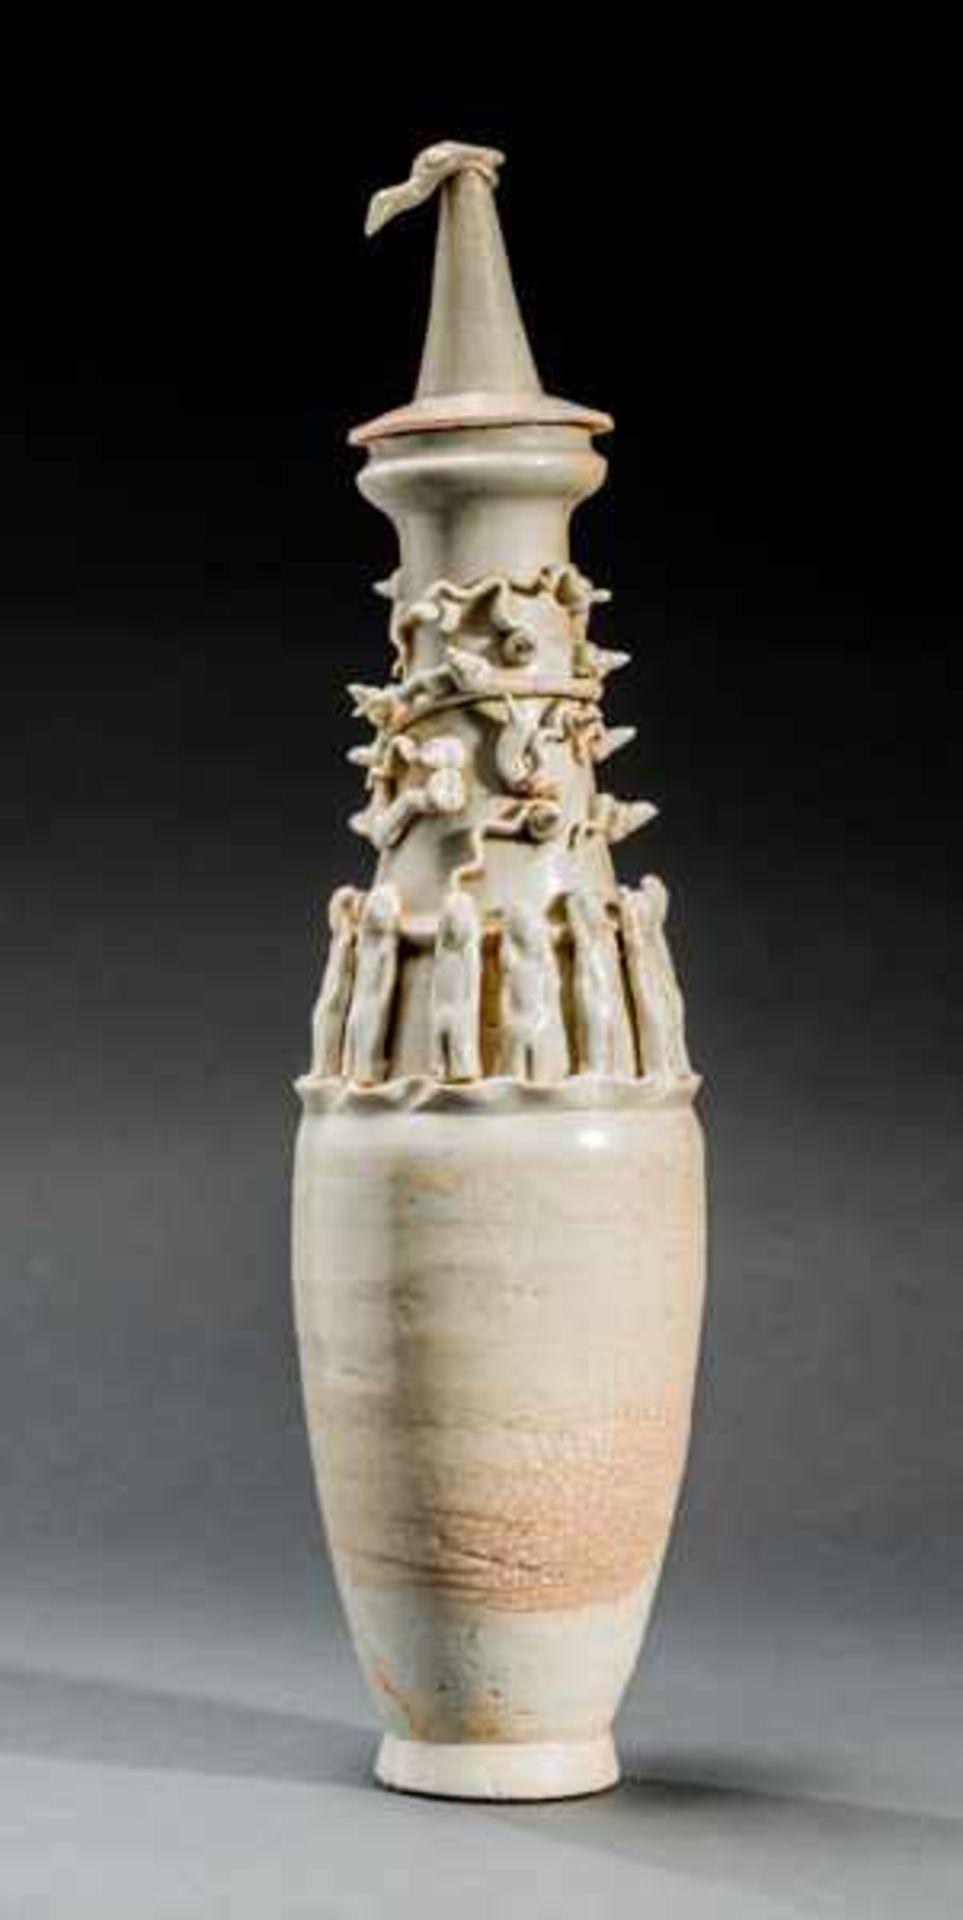 TALL BURIAL VASE Glazed ceramic. China, Song dynasty(12th/13th cent.)個墓葬瓶Burial vases of this kind - Image 2 of 5